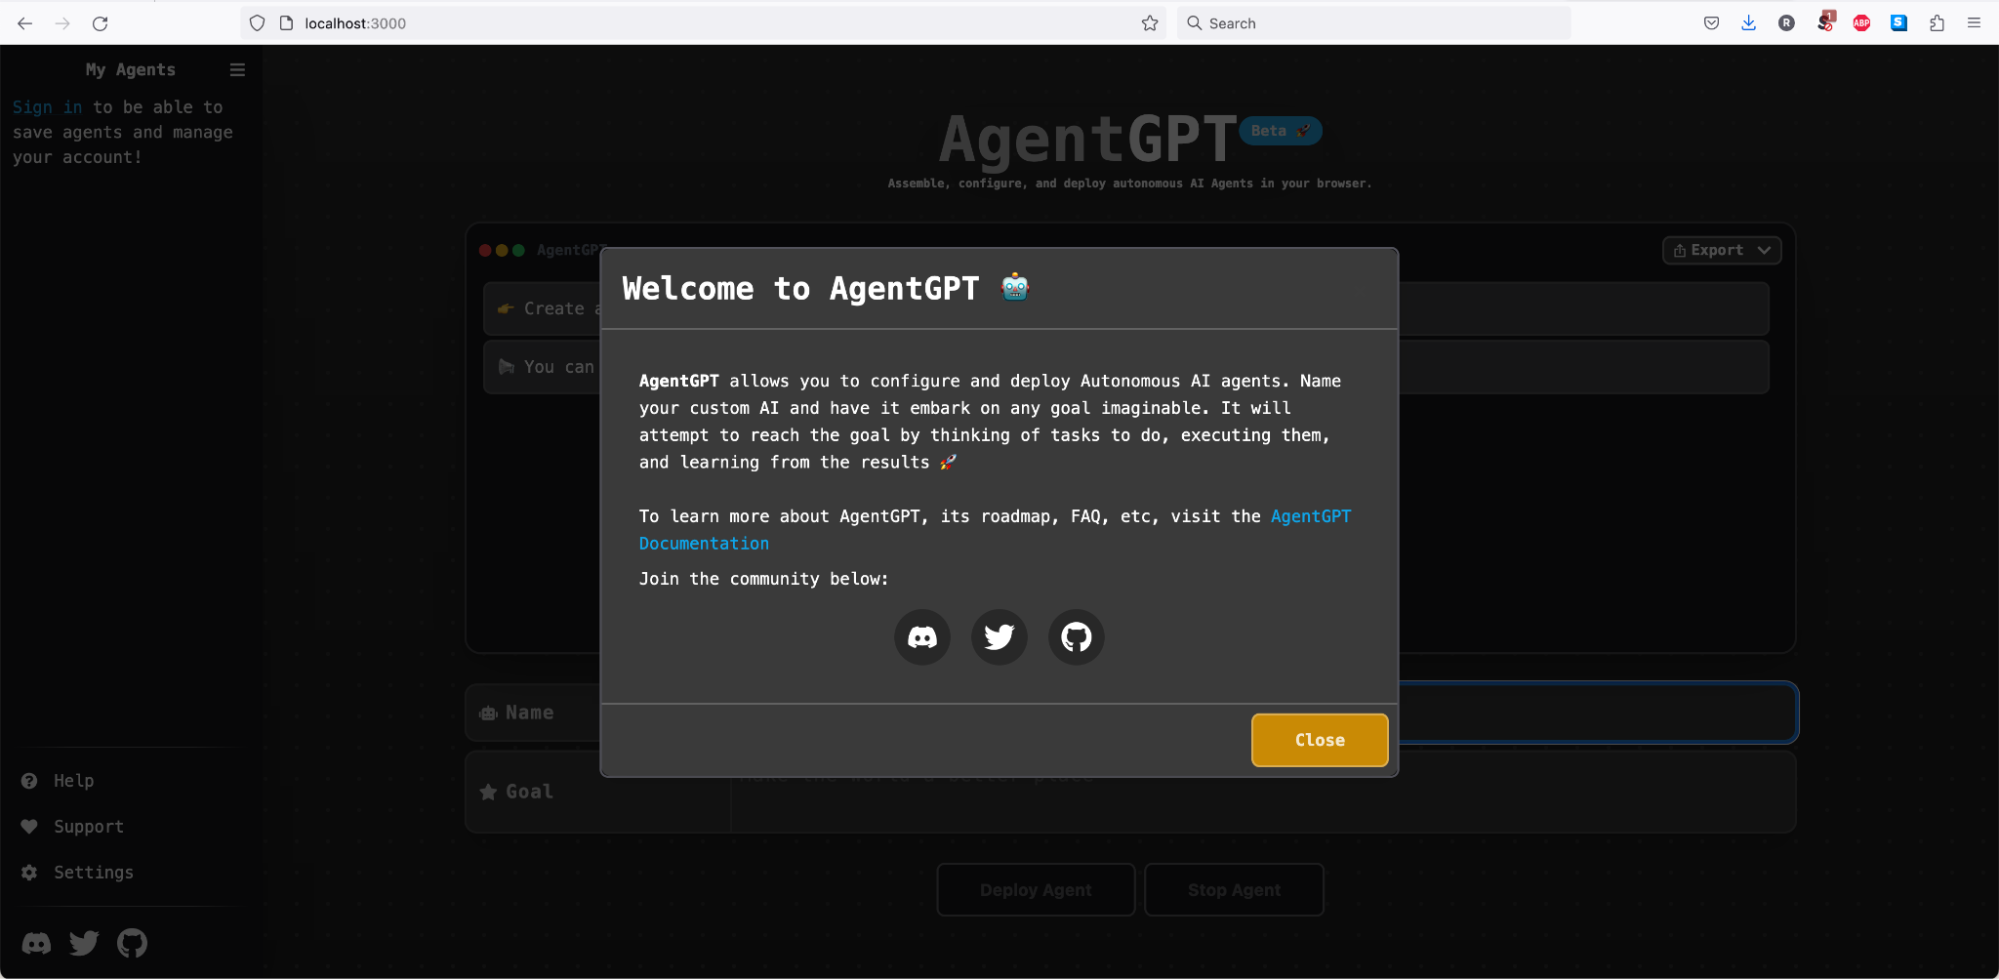 AgentGPT welcome screen